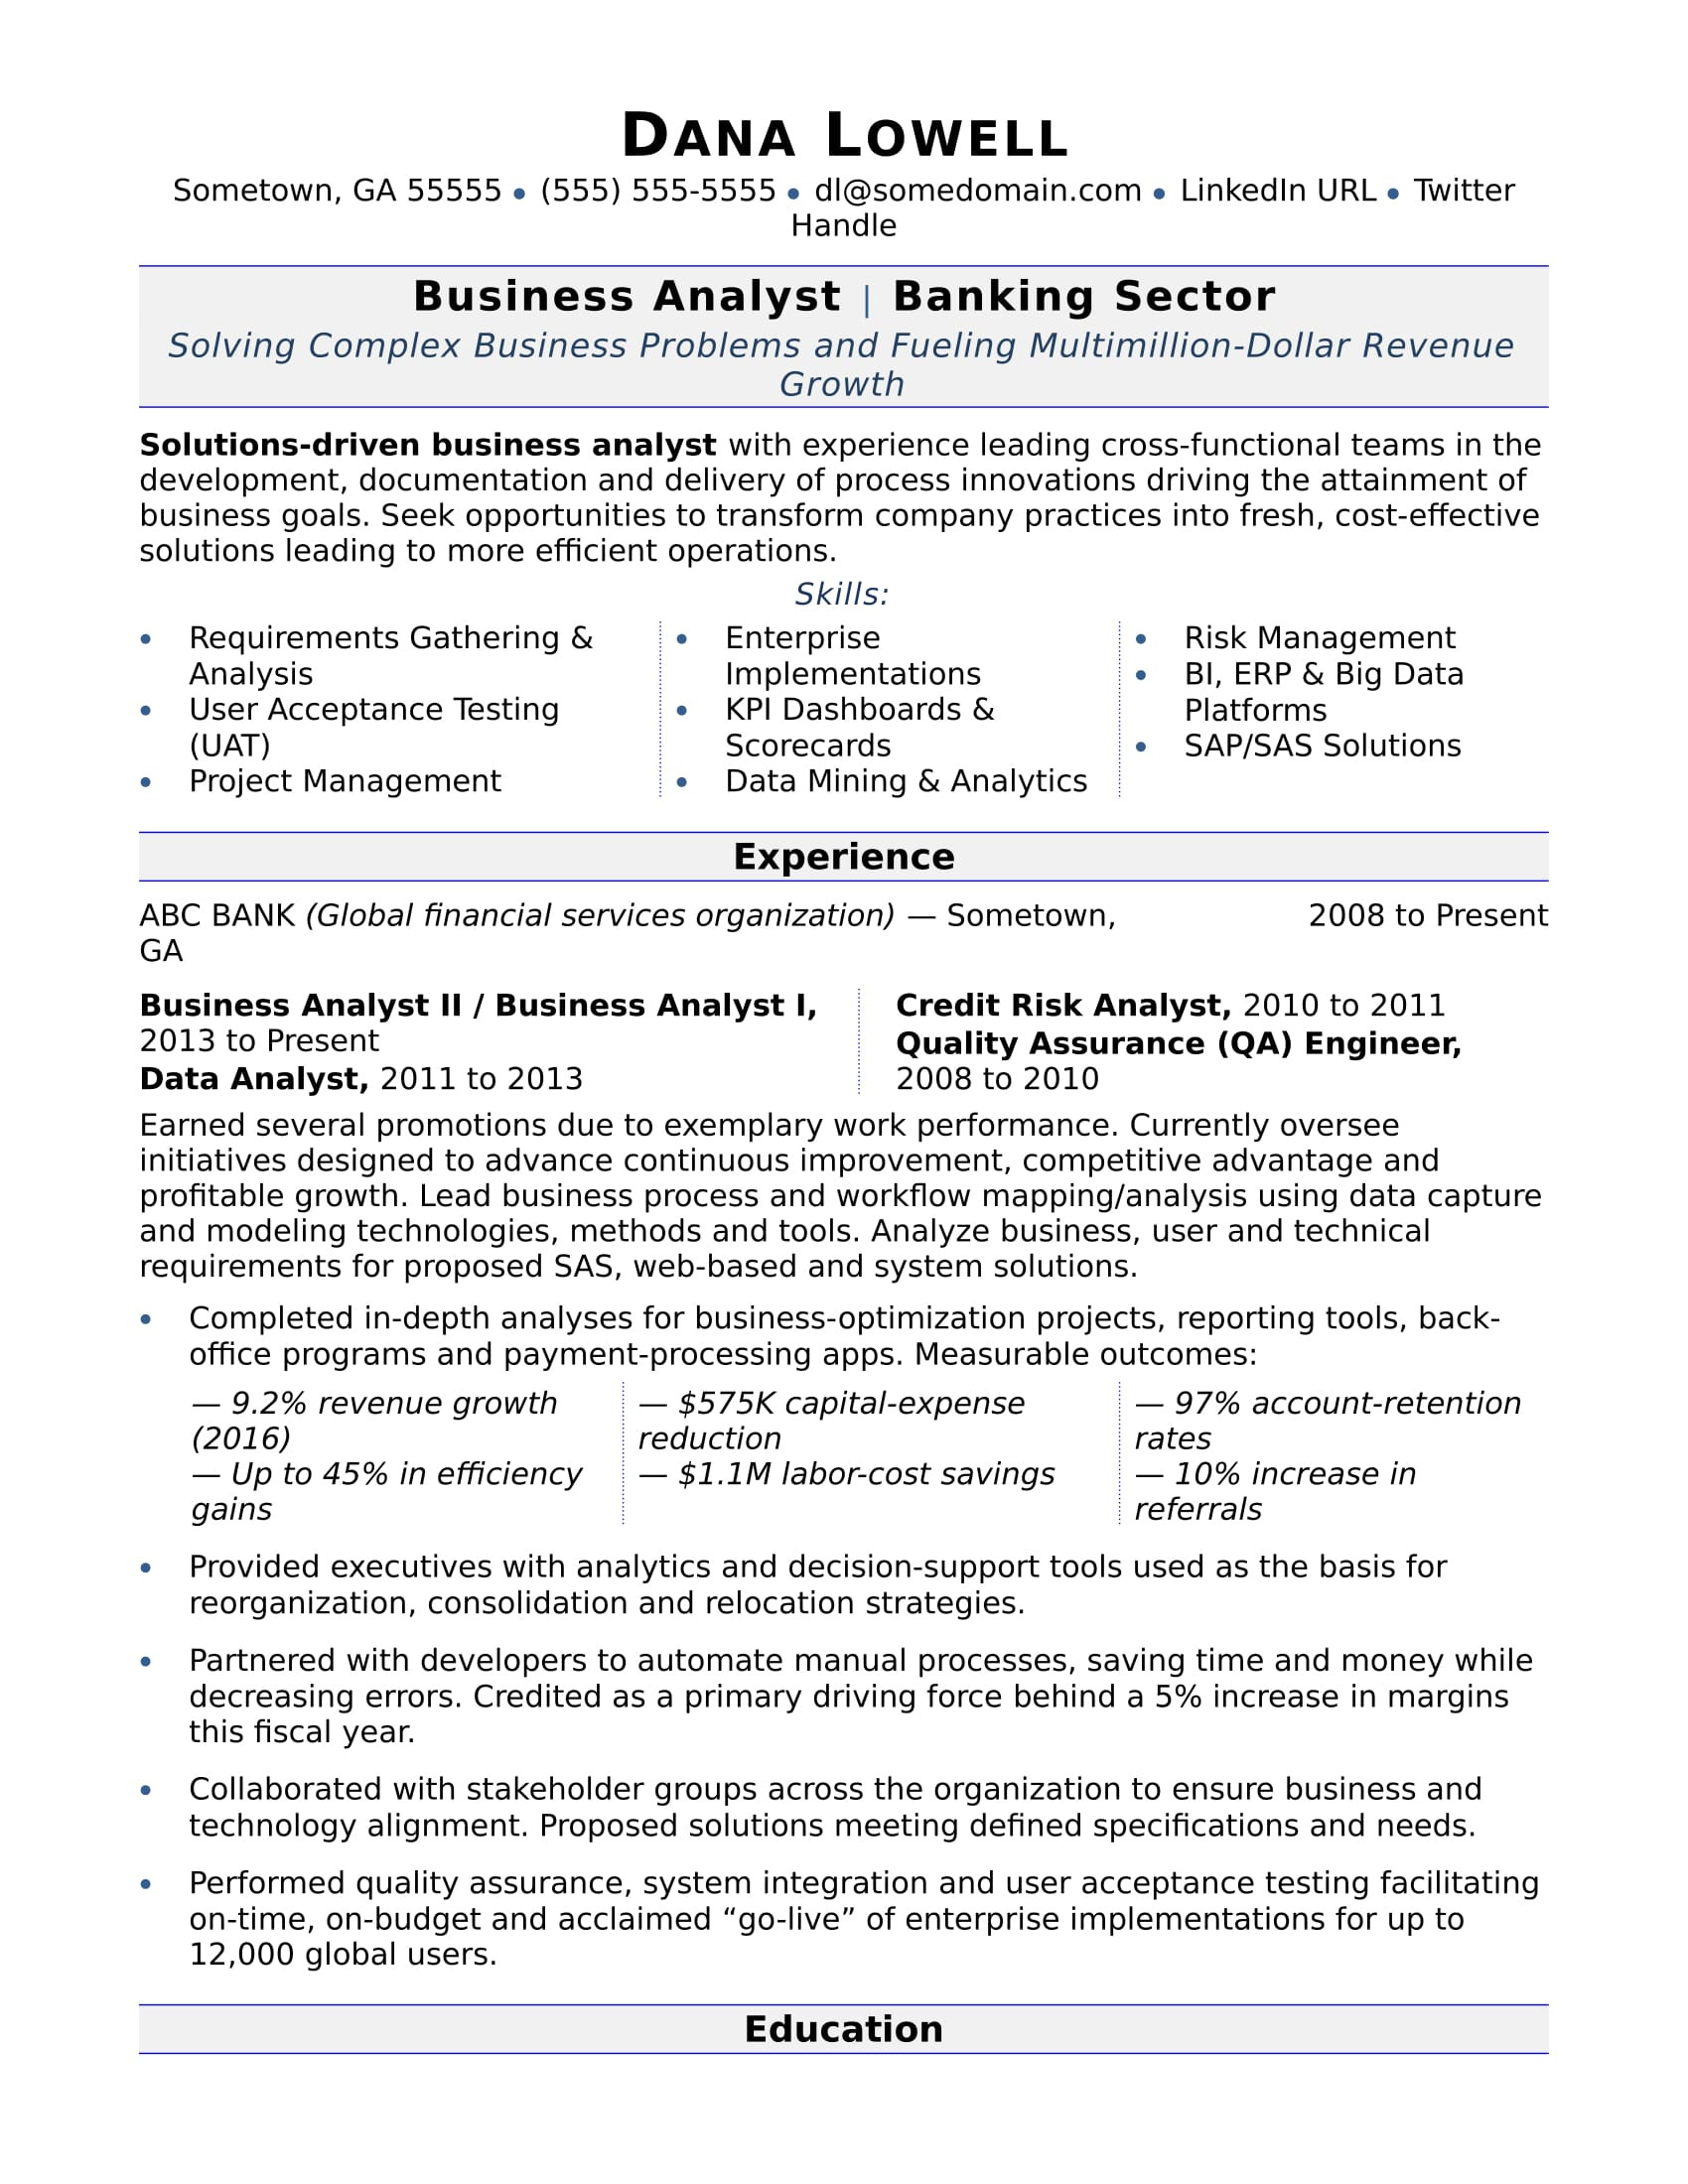 Insurance Company Business Analyst Resume Sample Business Analyst Resume Monster.com